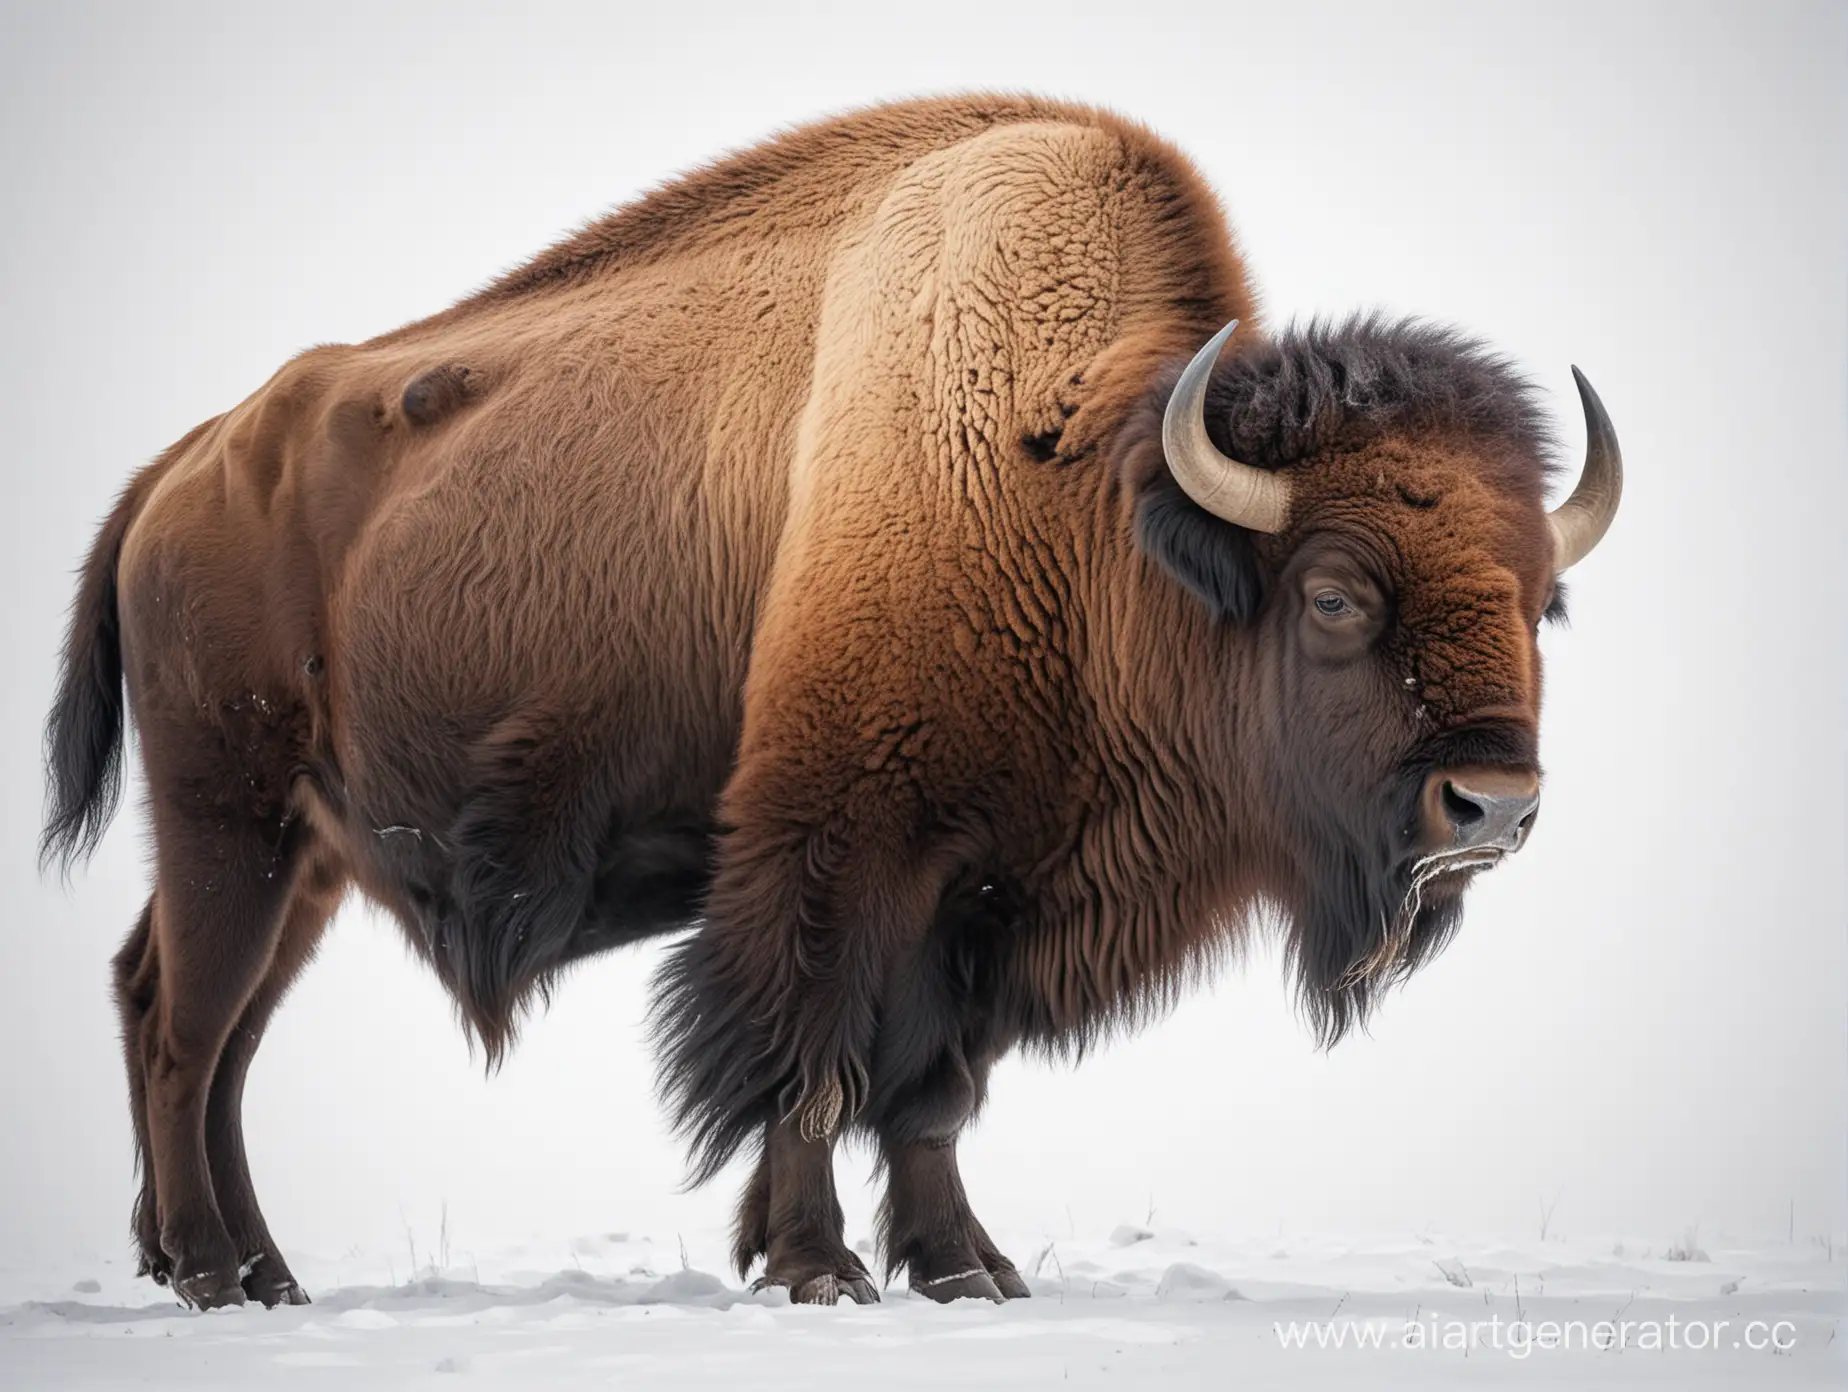 bison on the white background